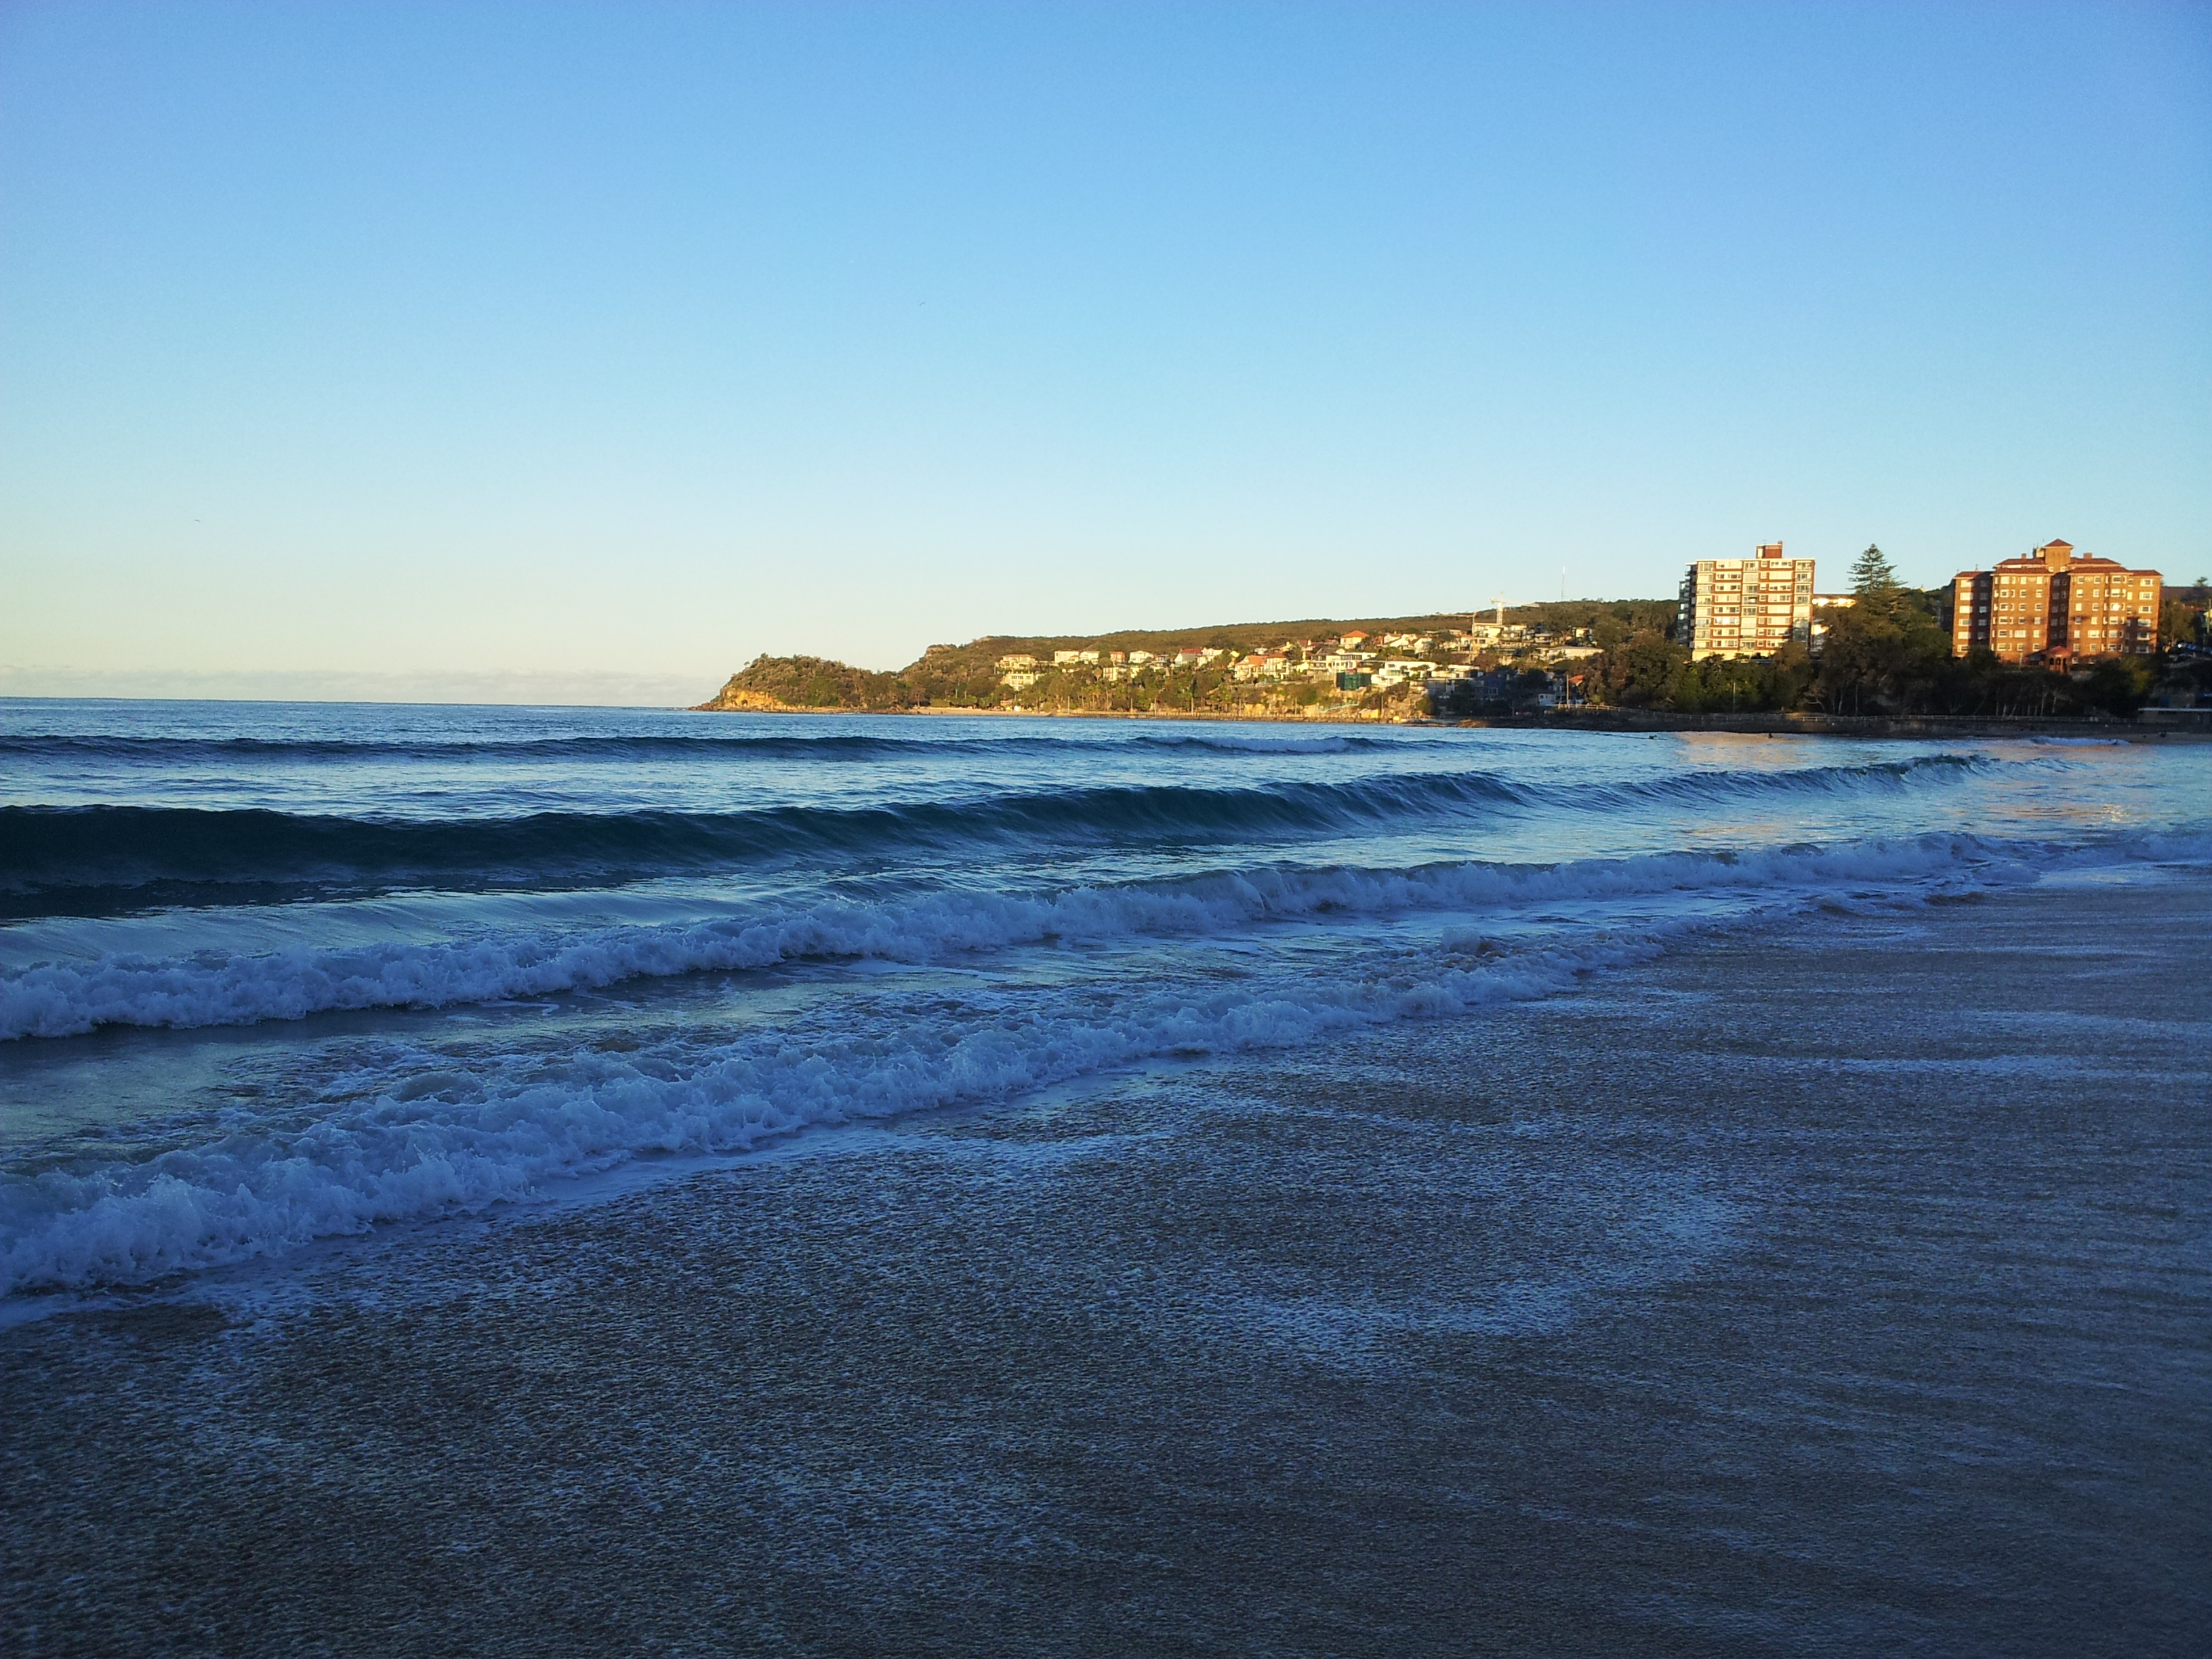 Manly Beach. Lovely place, even in the "winter"